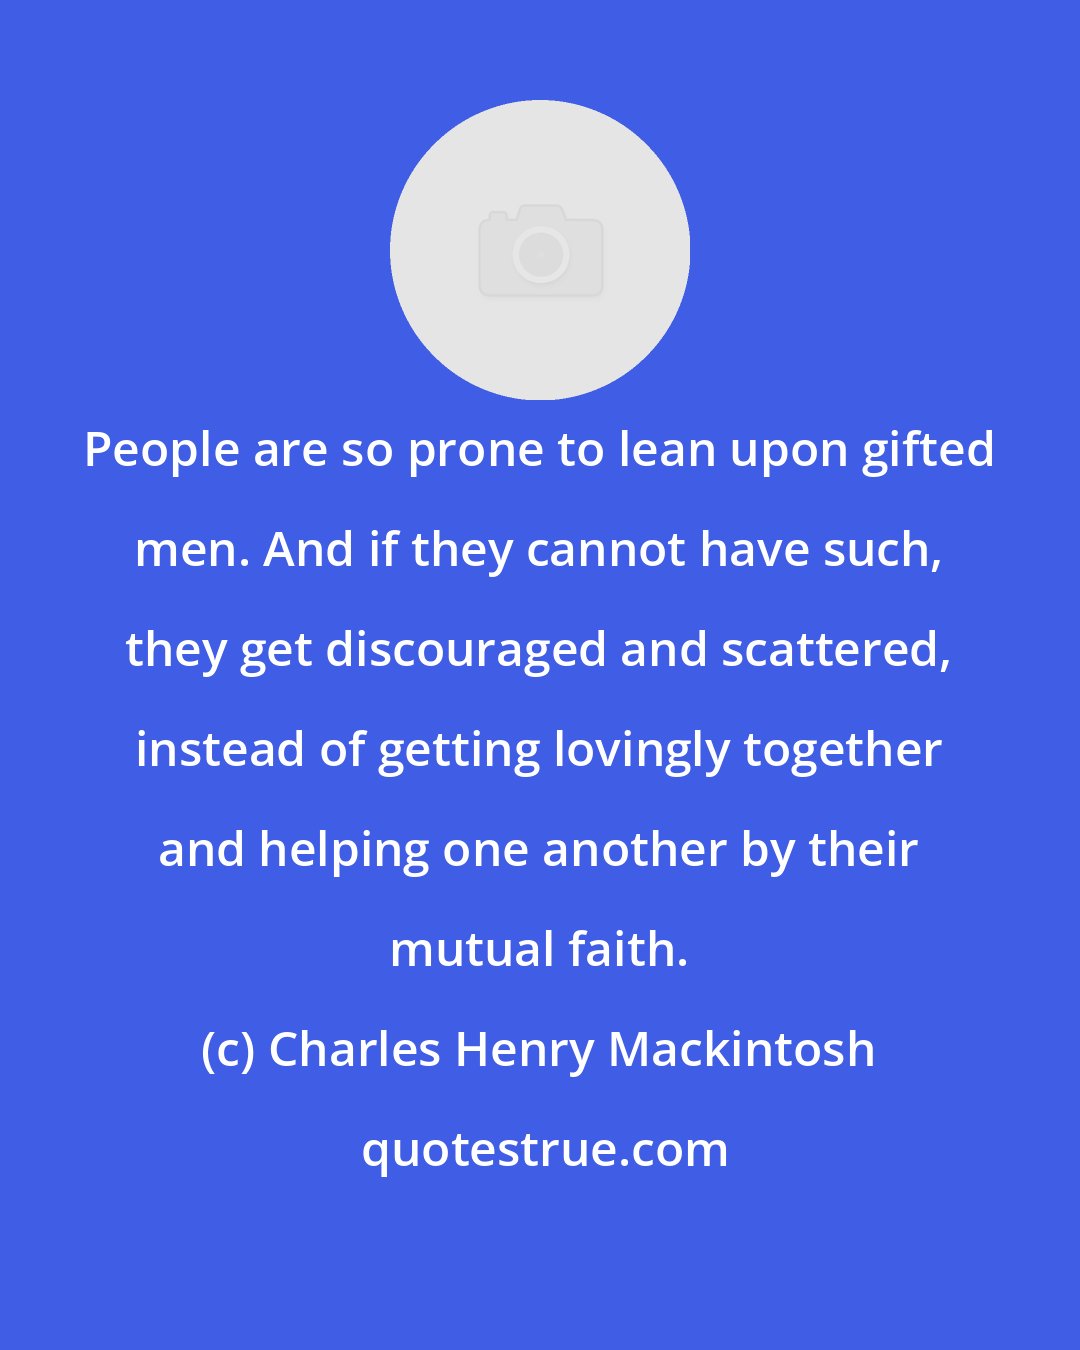 Charles Henry Mackintosh: People are so prone to lean upon gifted men. And if they cannot have such, they get discouraged and scattered, instead of getting lovingly together and helping one another by their mutual faith.